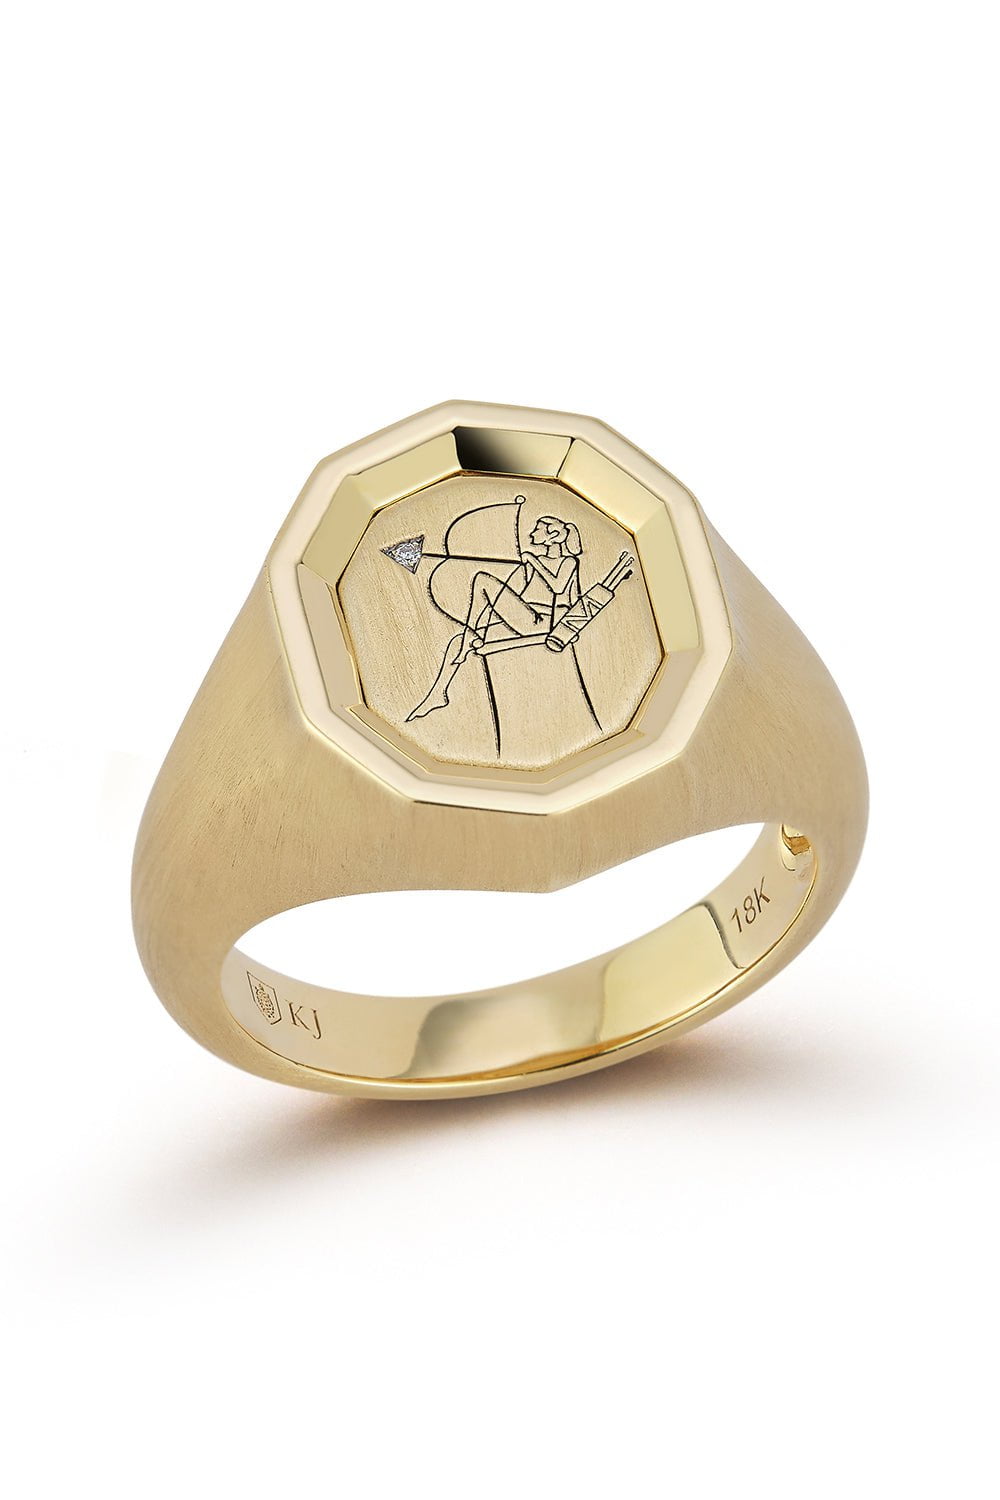 KATHERINE JETTER-The Archeress Ring-YELLOW GOLD